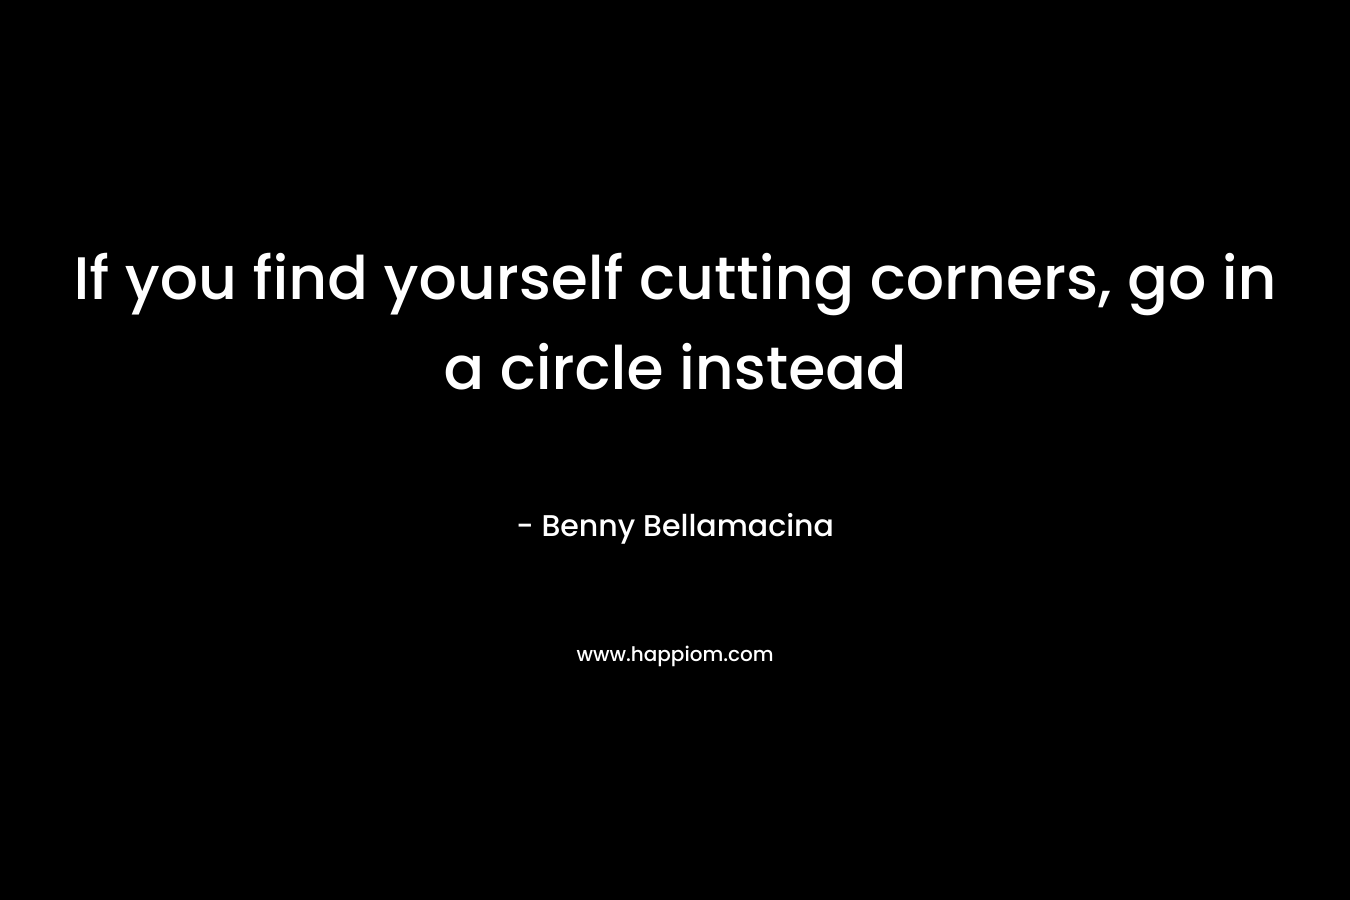 If you find yourself cutting corners, go in a circle instead